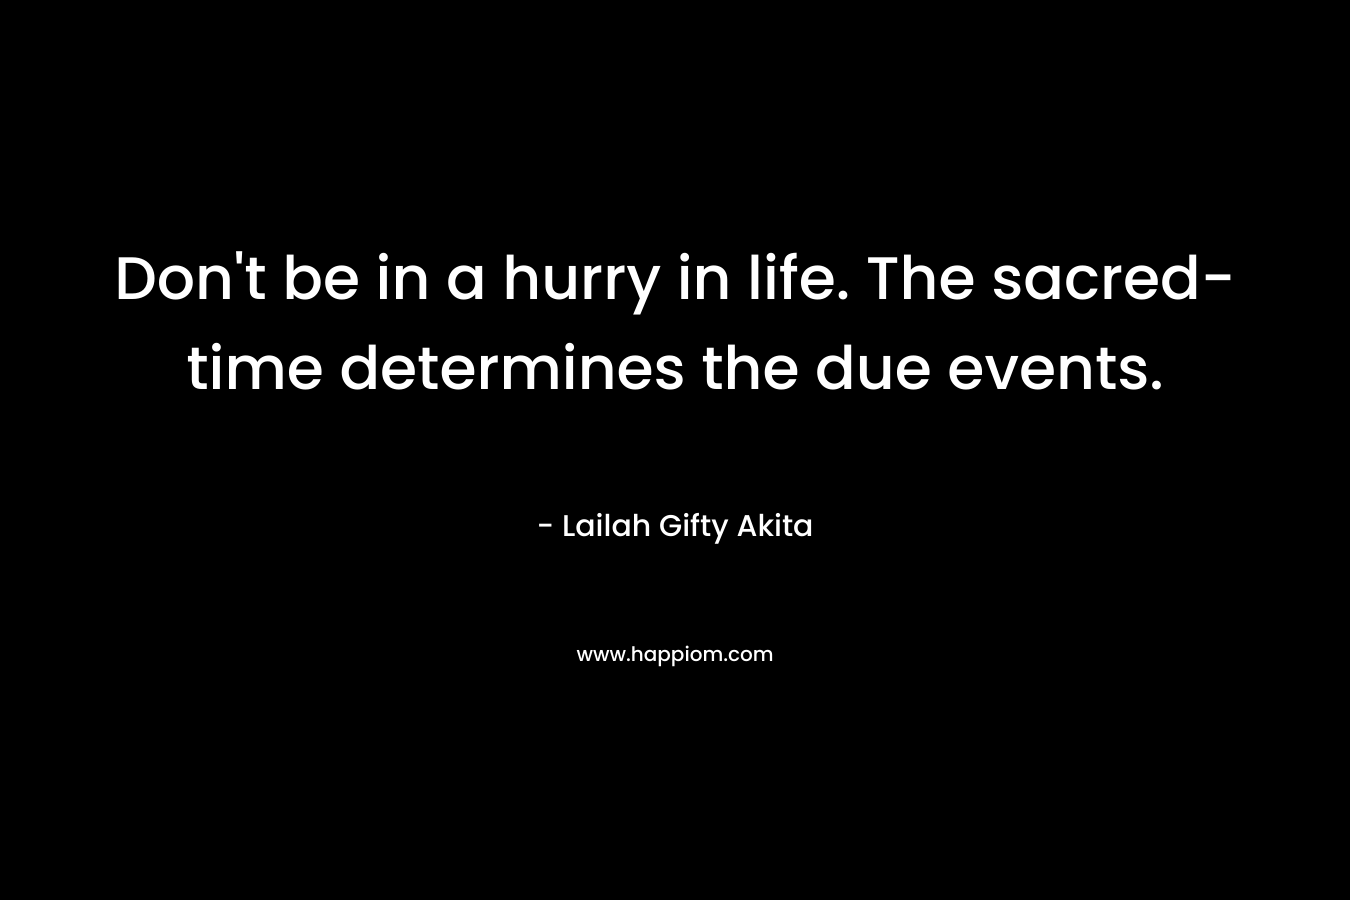 Don't be in a hurry in life. The sacred-time determines the due events.